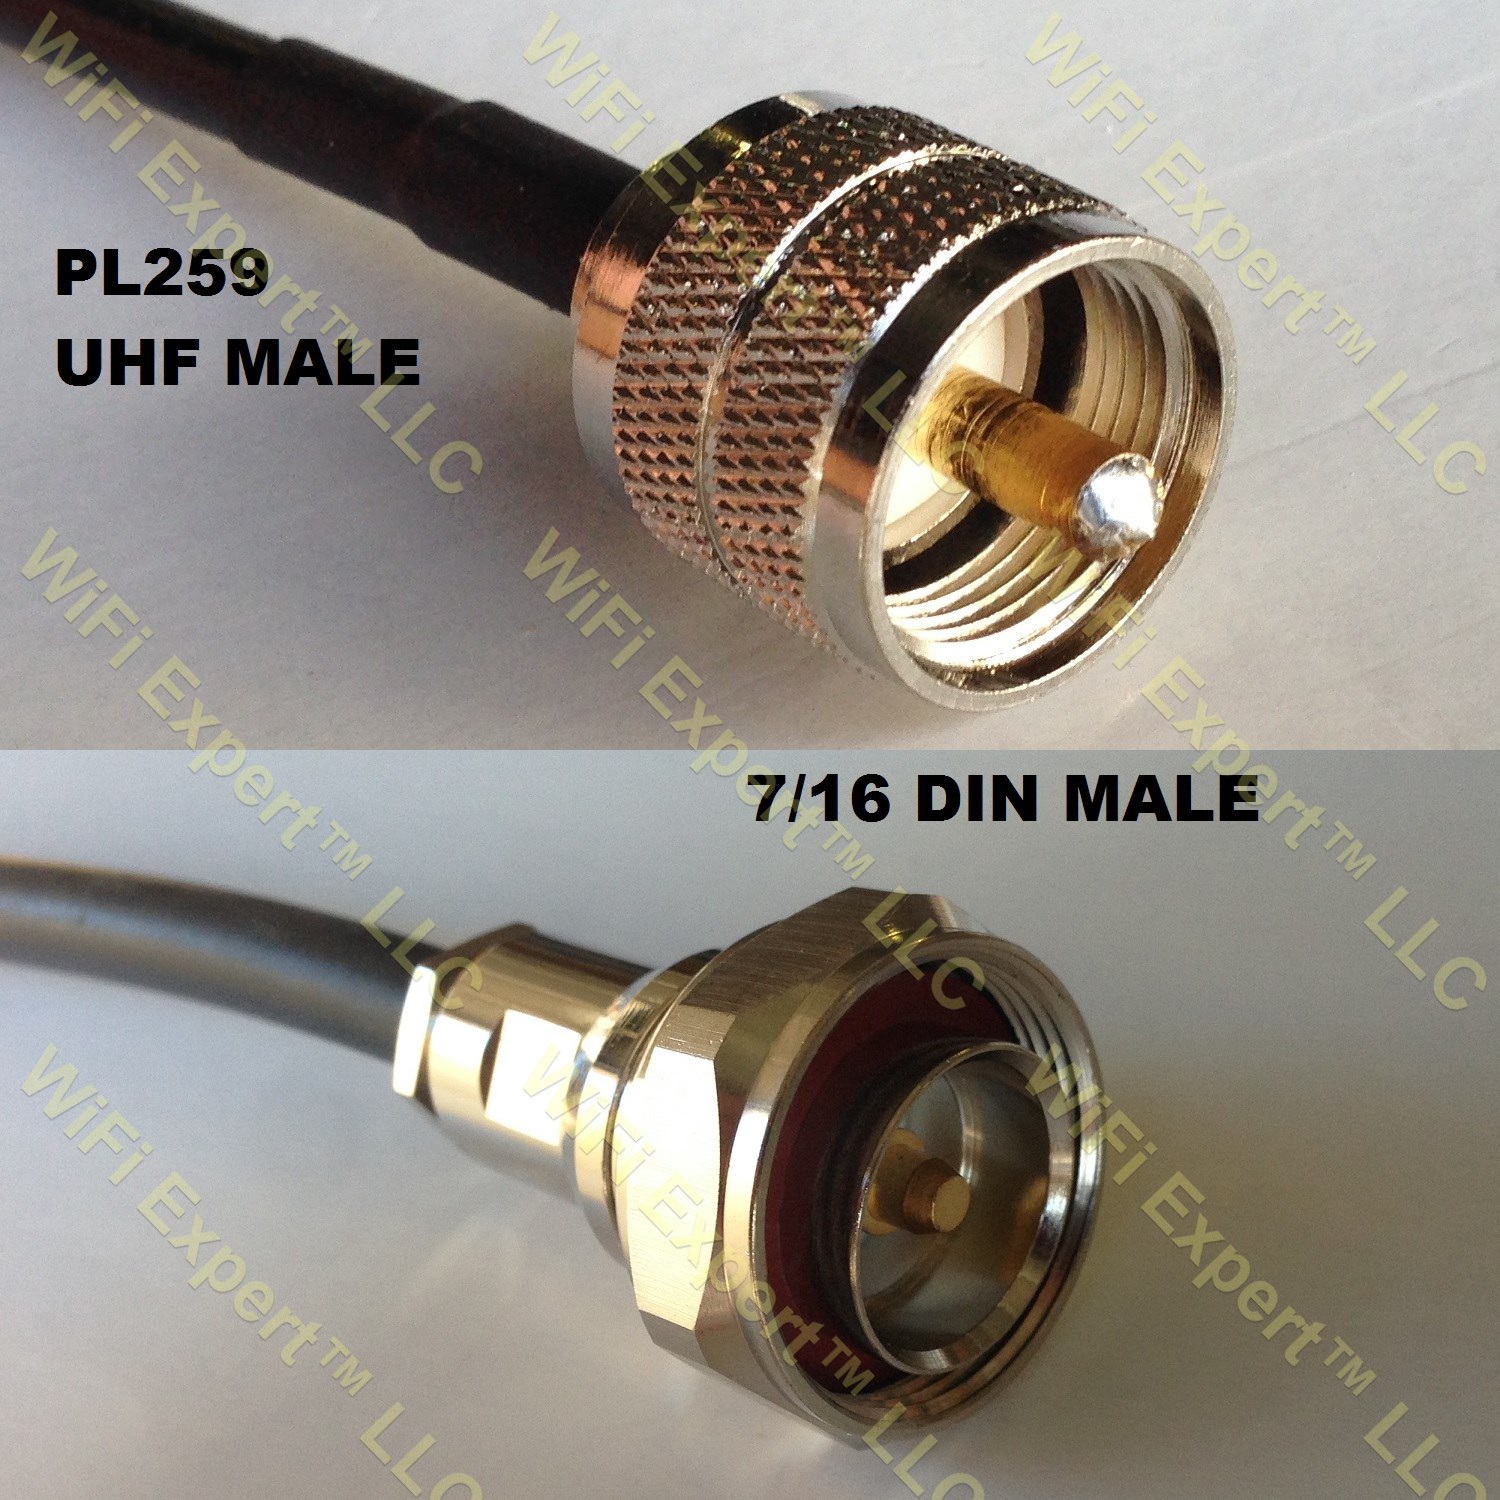 LMR400 PL259 UHF Male to DIN 7/16 MALE Coaxial RF Pigtail Cable 